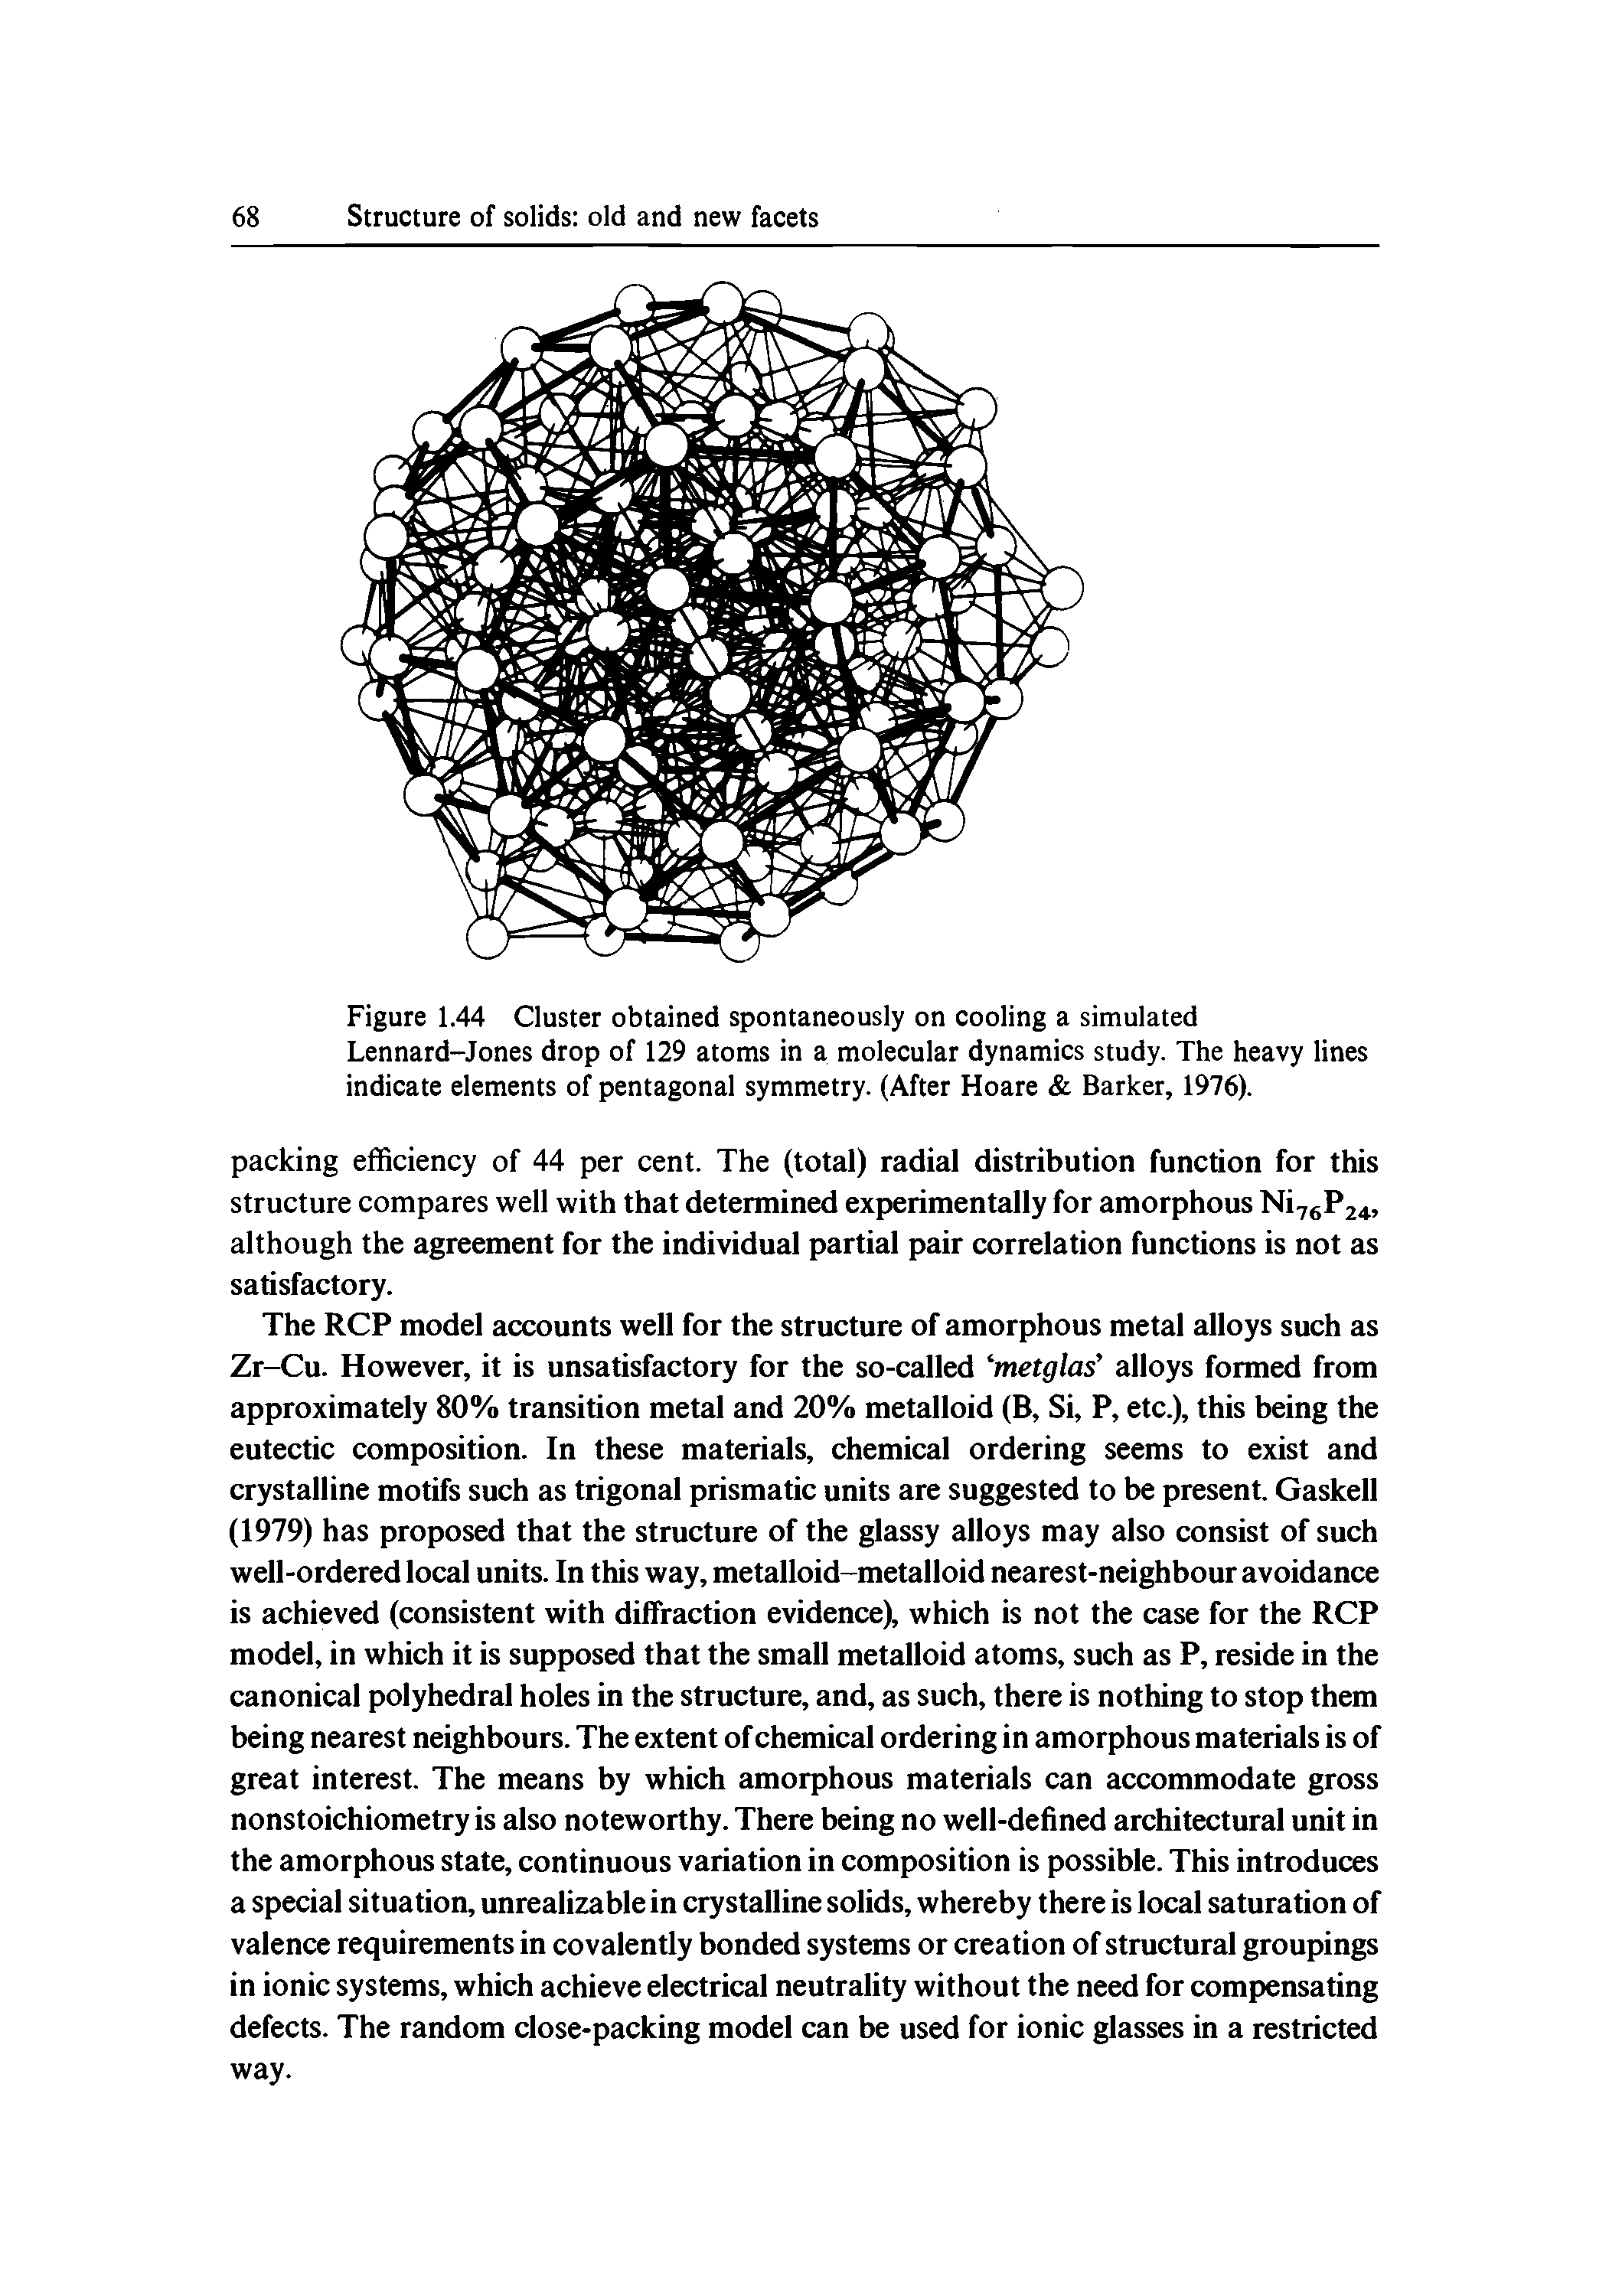 Figure 1.44 Cluster obtained spontaneously on cooling a simulated Lennard-Jones drop of 129 atoms in a molecular dynamics study. The heavy lines indicate elements of pentagonal symmetry. (After Hoare Barker, 1976).